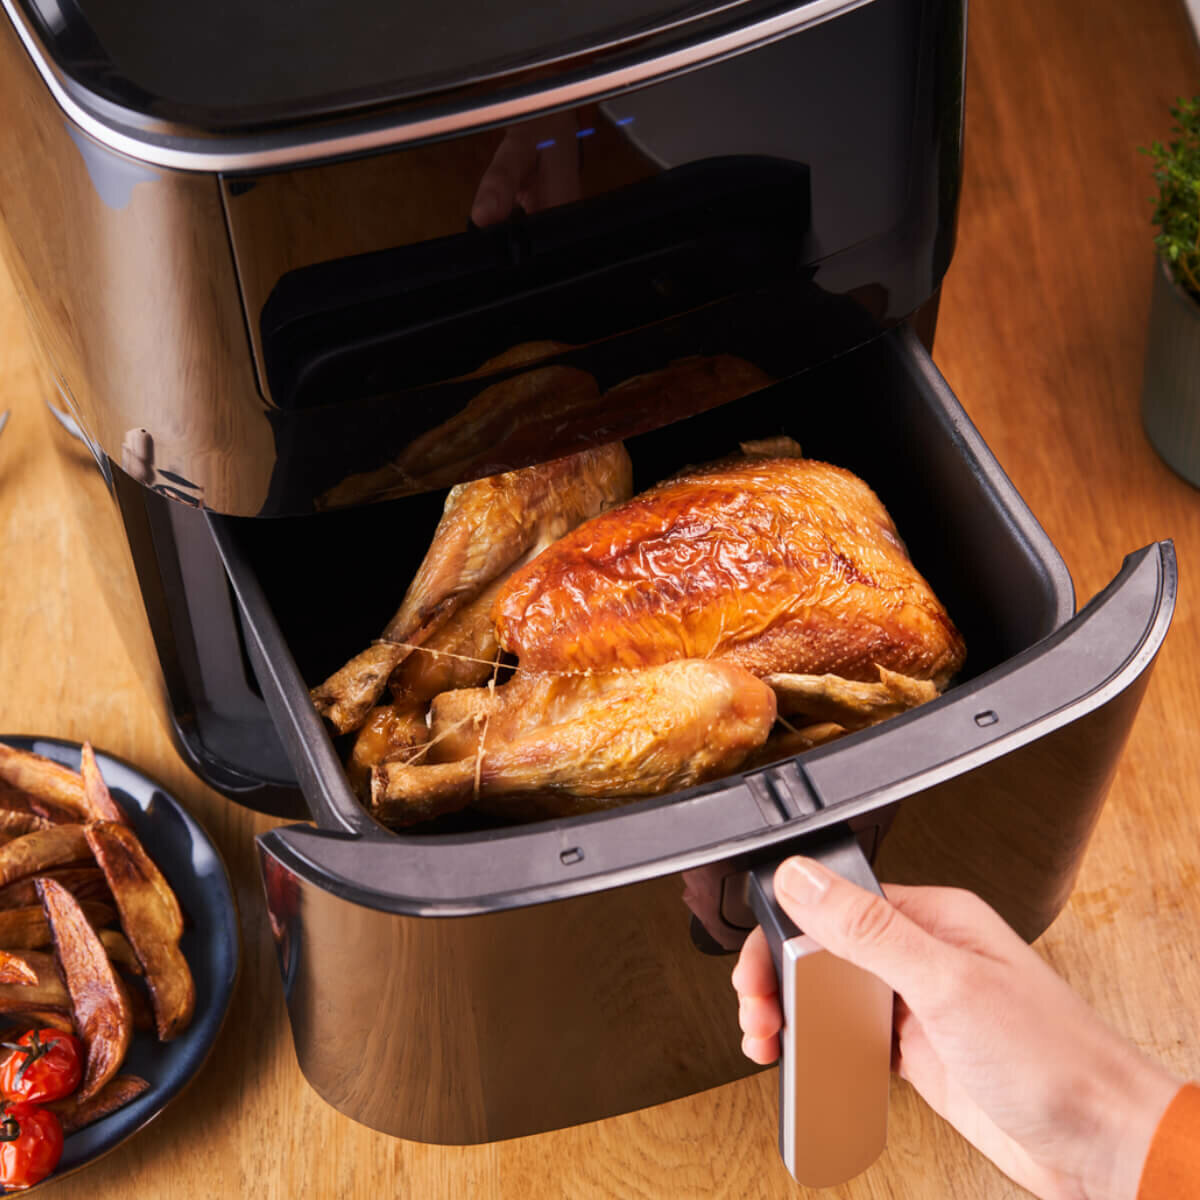 Tefal Easy Fry Grill and Steam XXL 3-in-1 Air Fryer FW2018